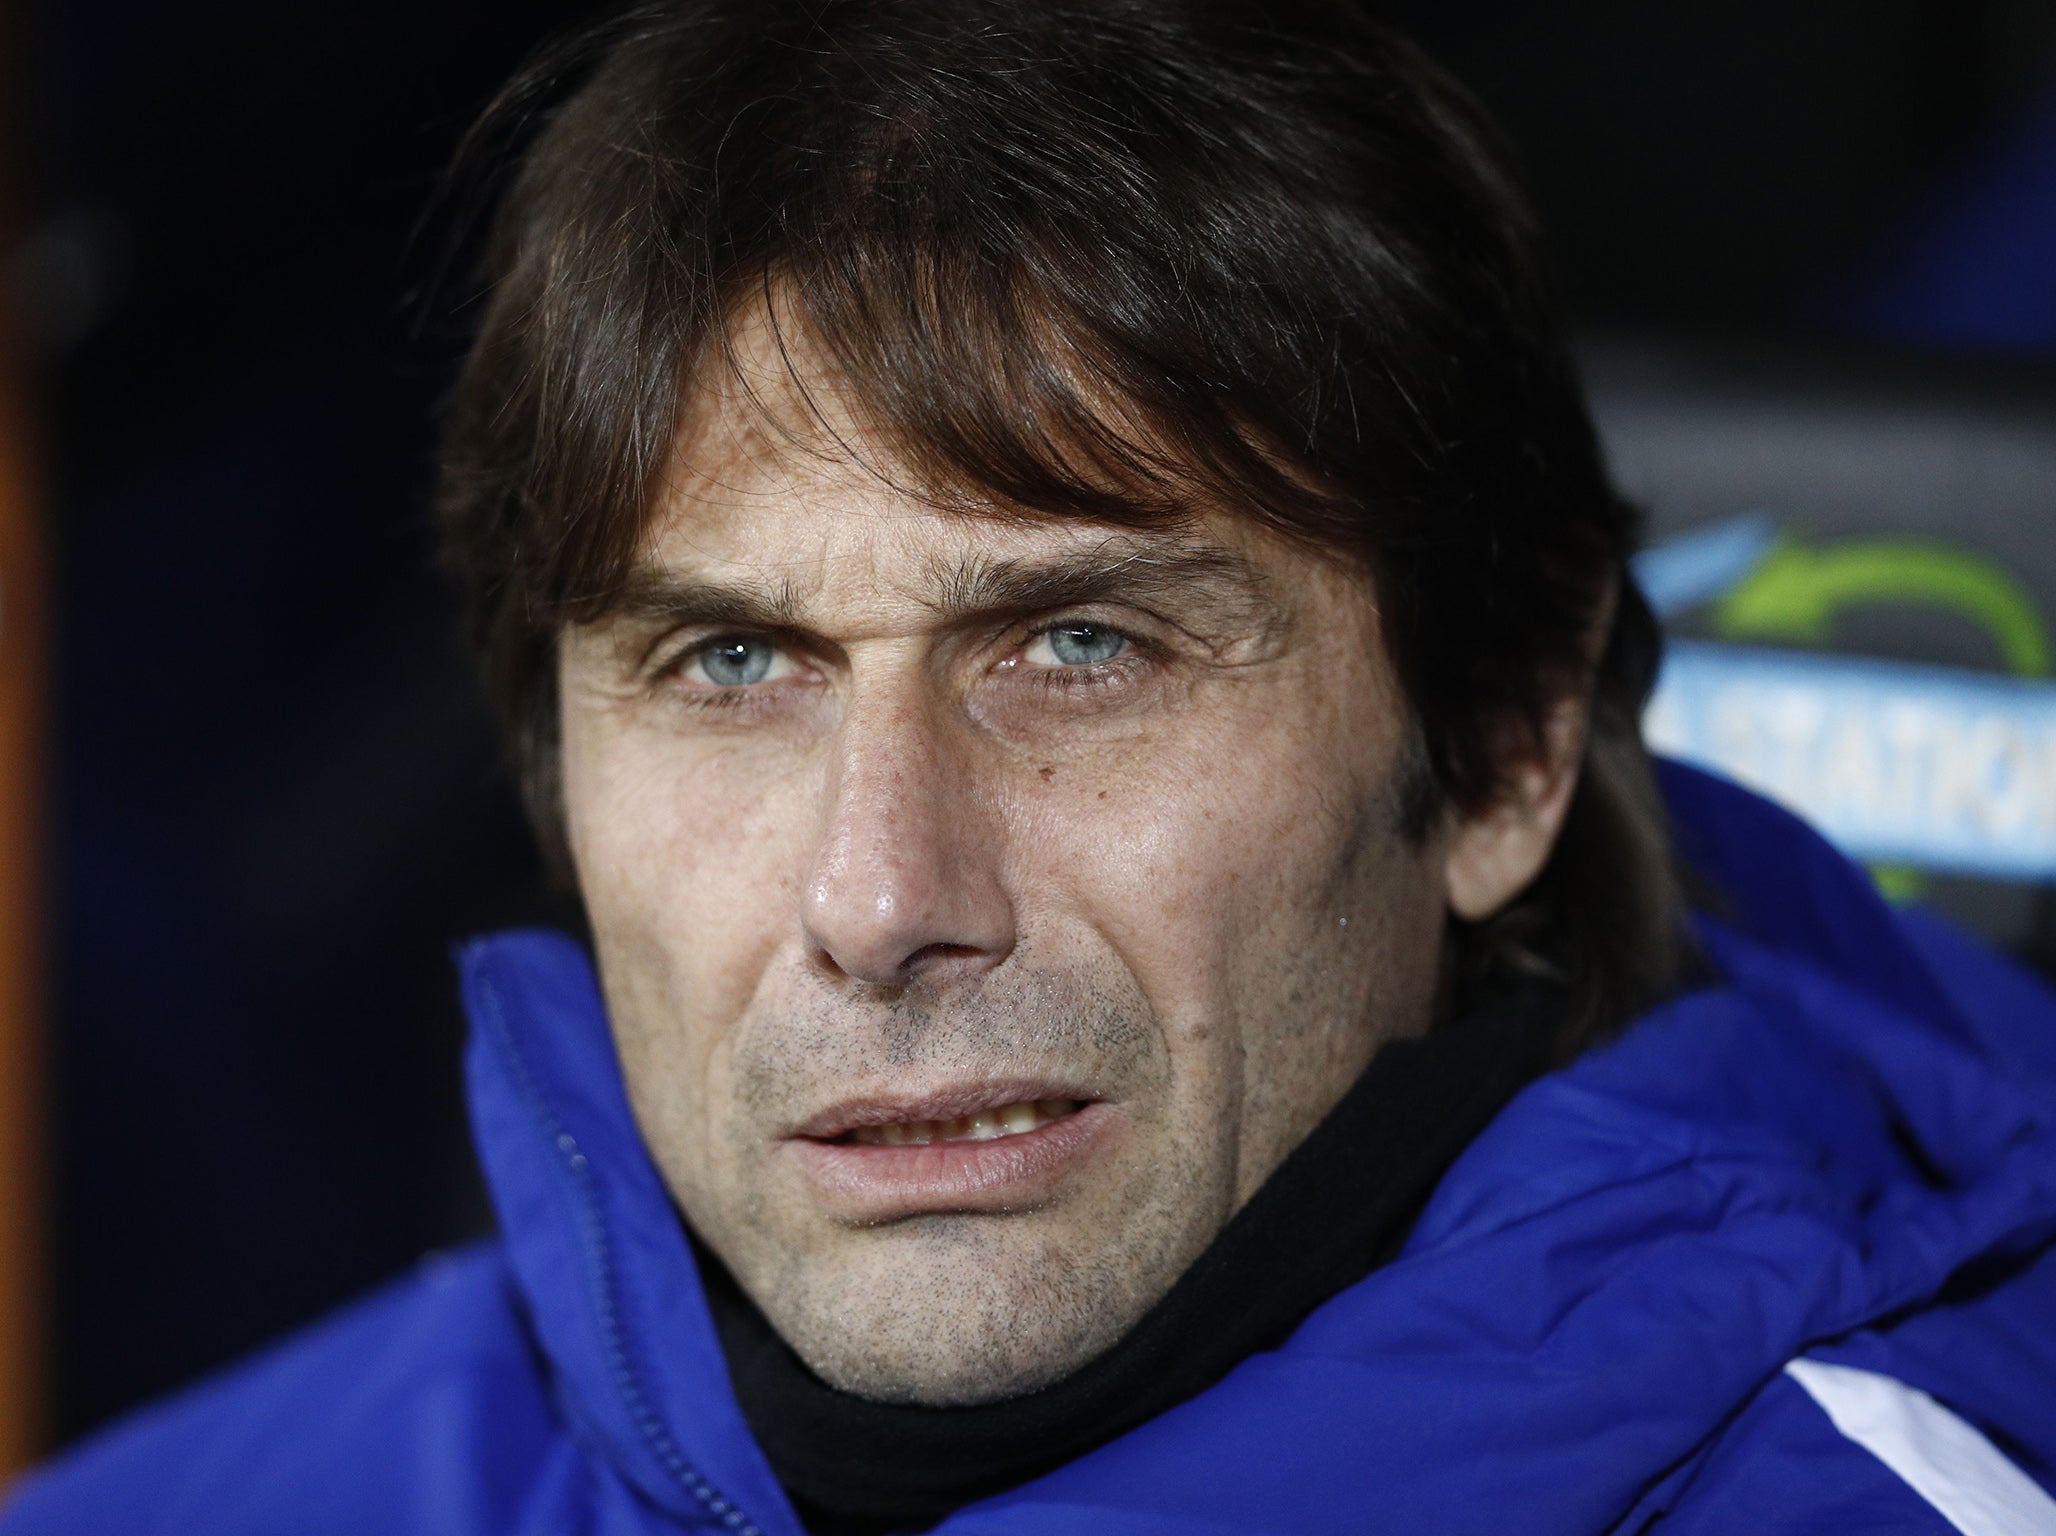 Antonio Conte was speaking after Chelsea's goalless draw at Norwich